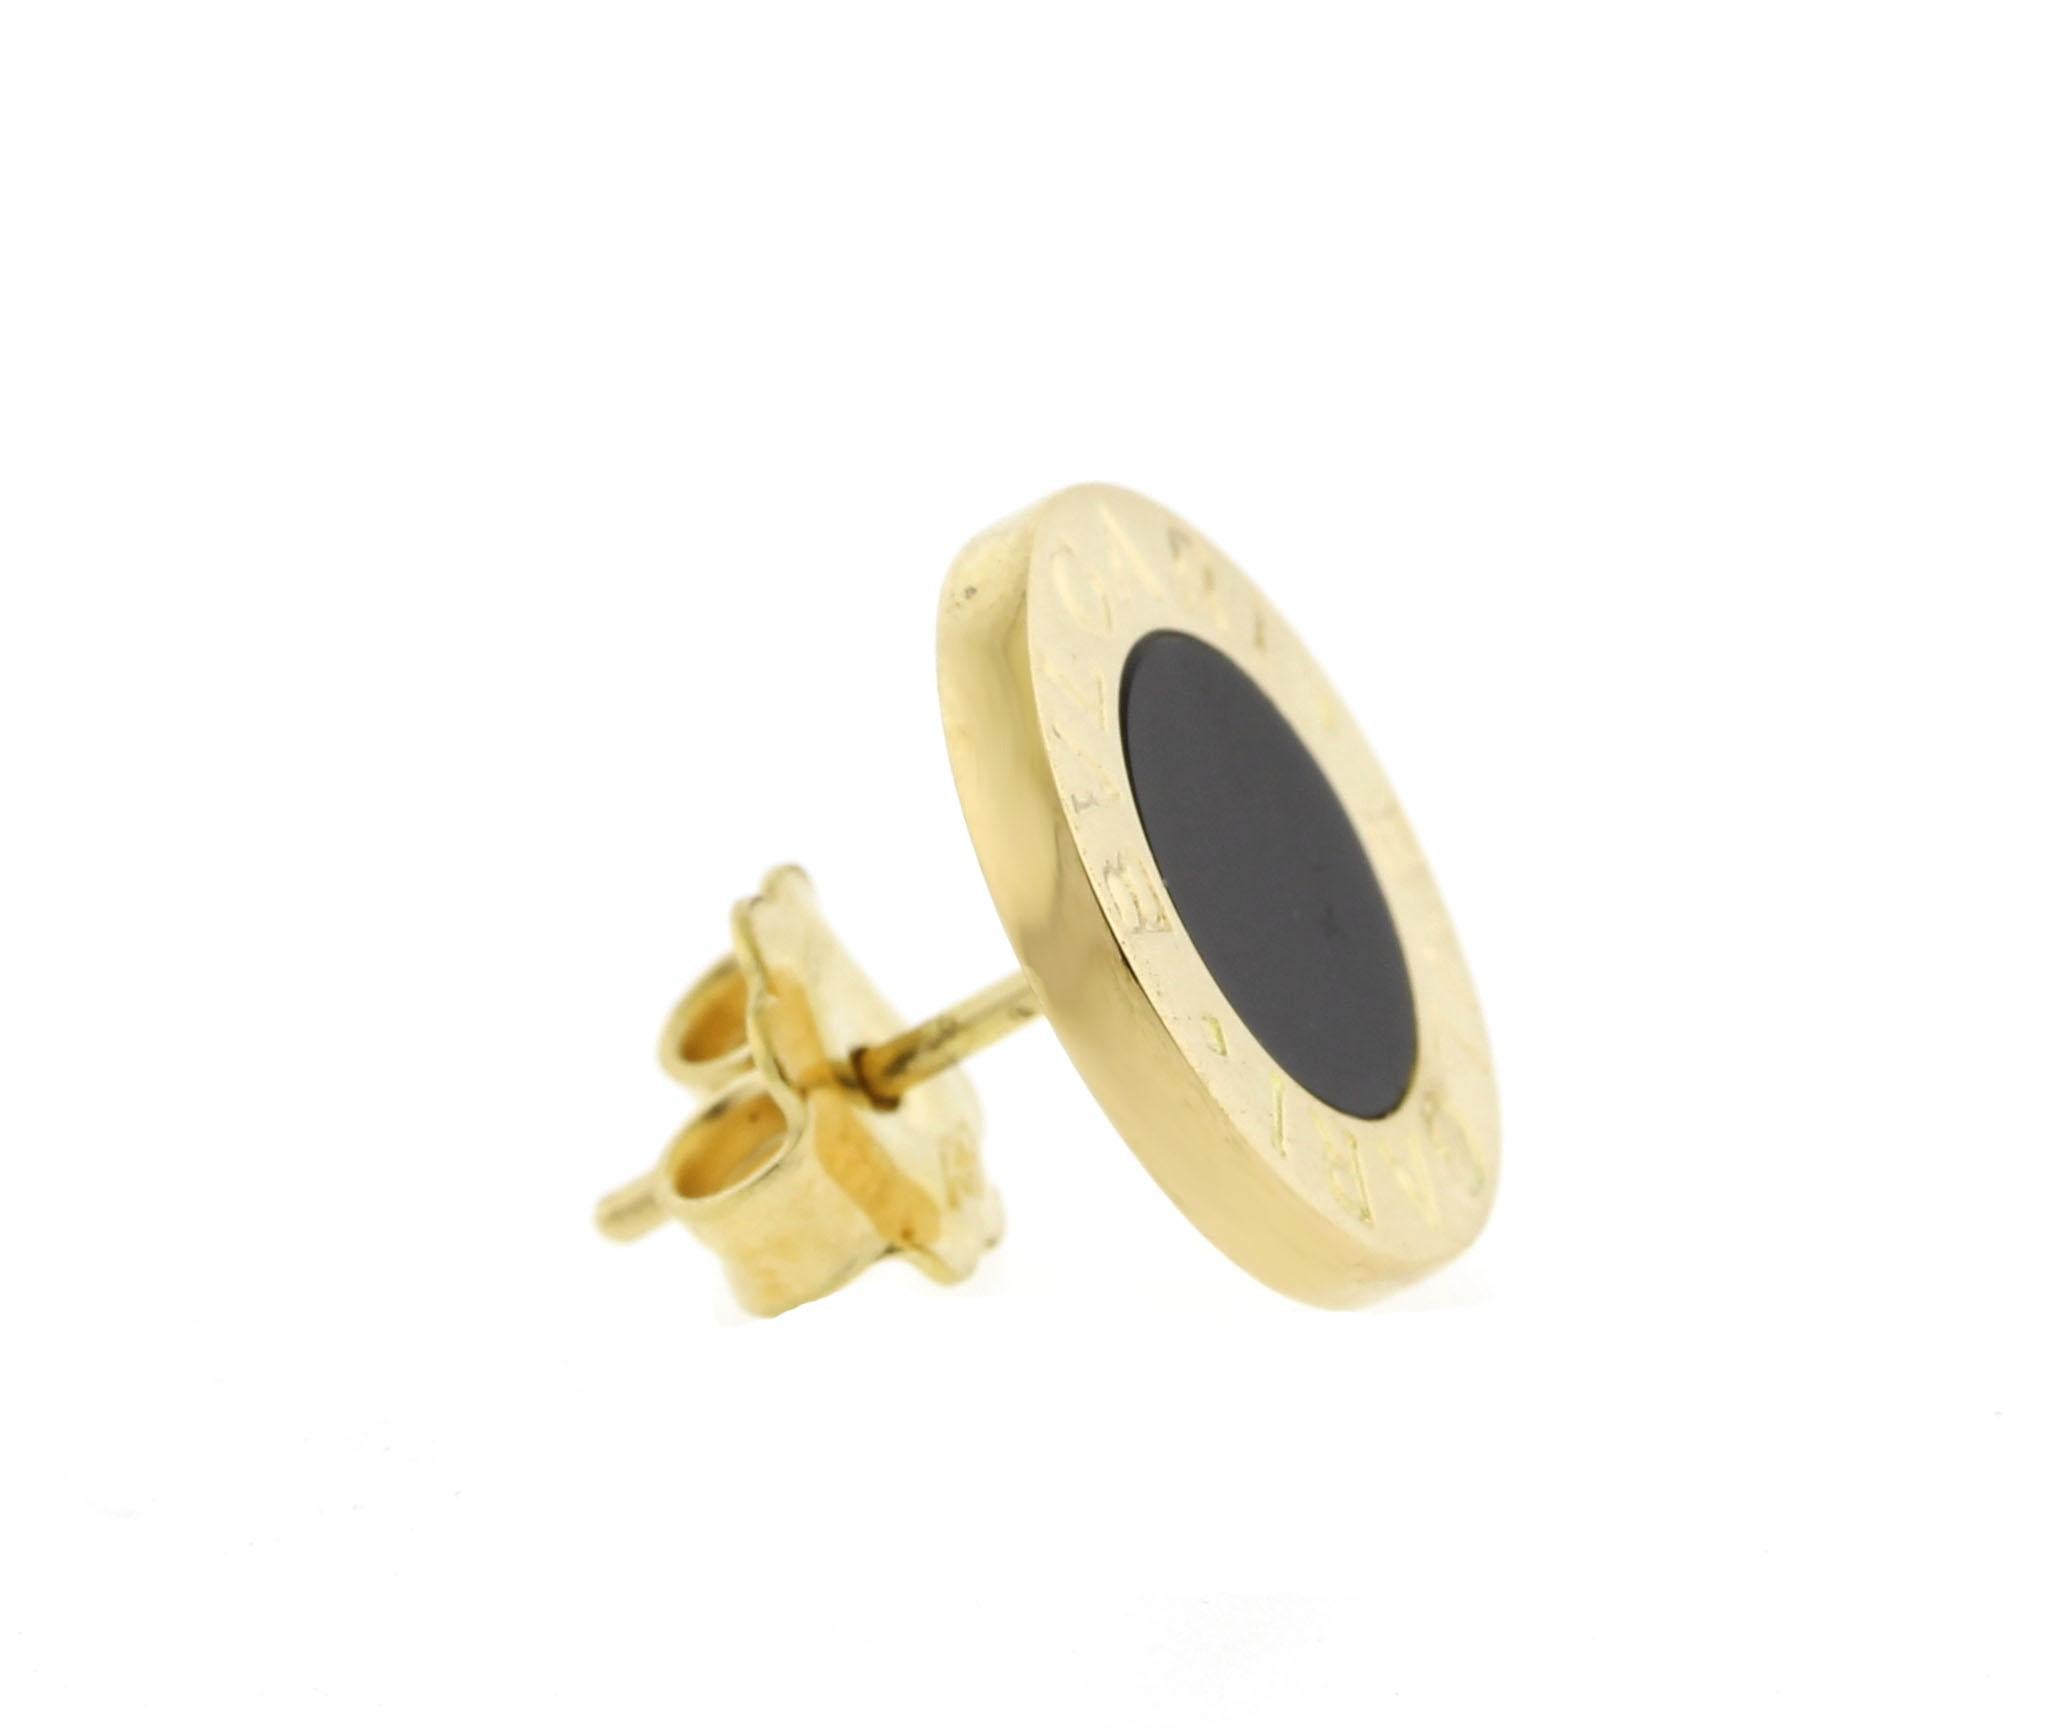 These Bvlgari earrings are black onyx with yellow gold in excellent condition.
• Metal: 18kt Yellow Gold
• Designer: Bvlgari
• Circa: 2020s
• Gemstone: Black Onyx
• Packaging: Original Bvlgari Box
• Condition: Excellent Condition